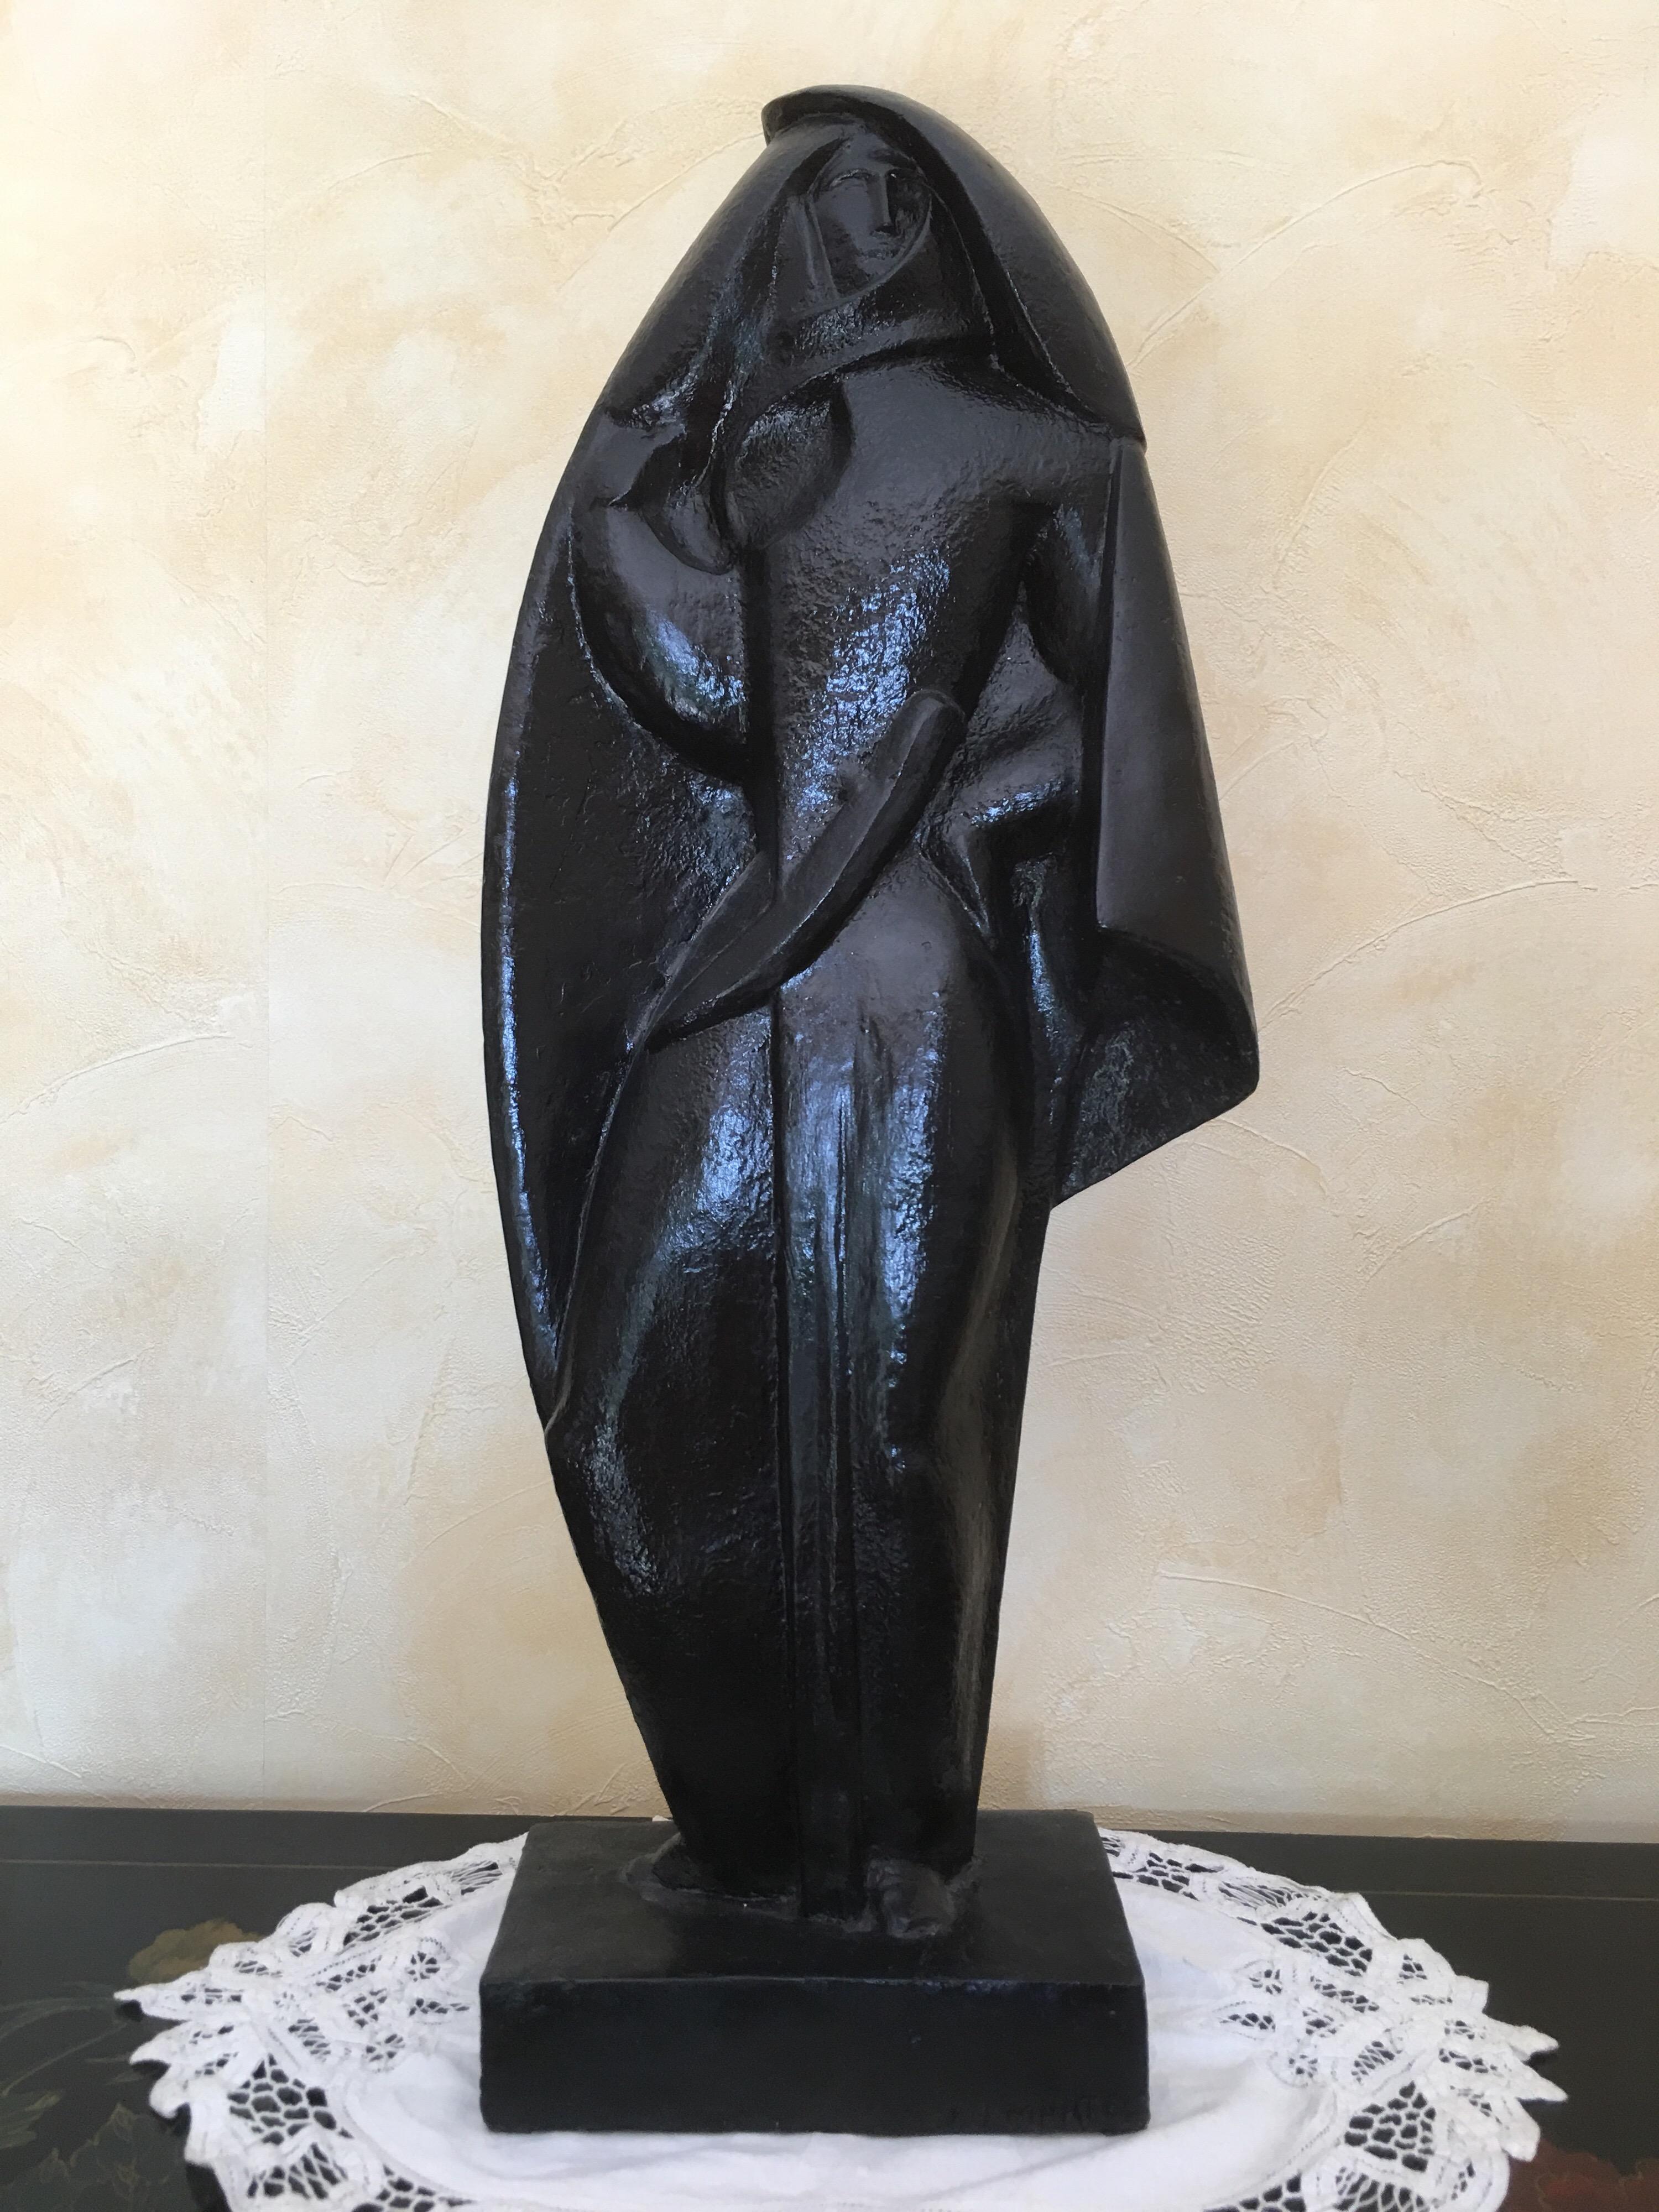 Unique creation in black glazed terracotta made by Jan and Joel Martel in France in 1931. This cubist sculpture represents an 